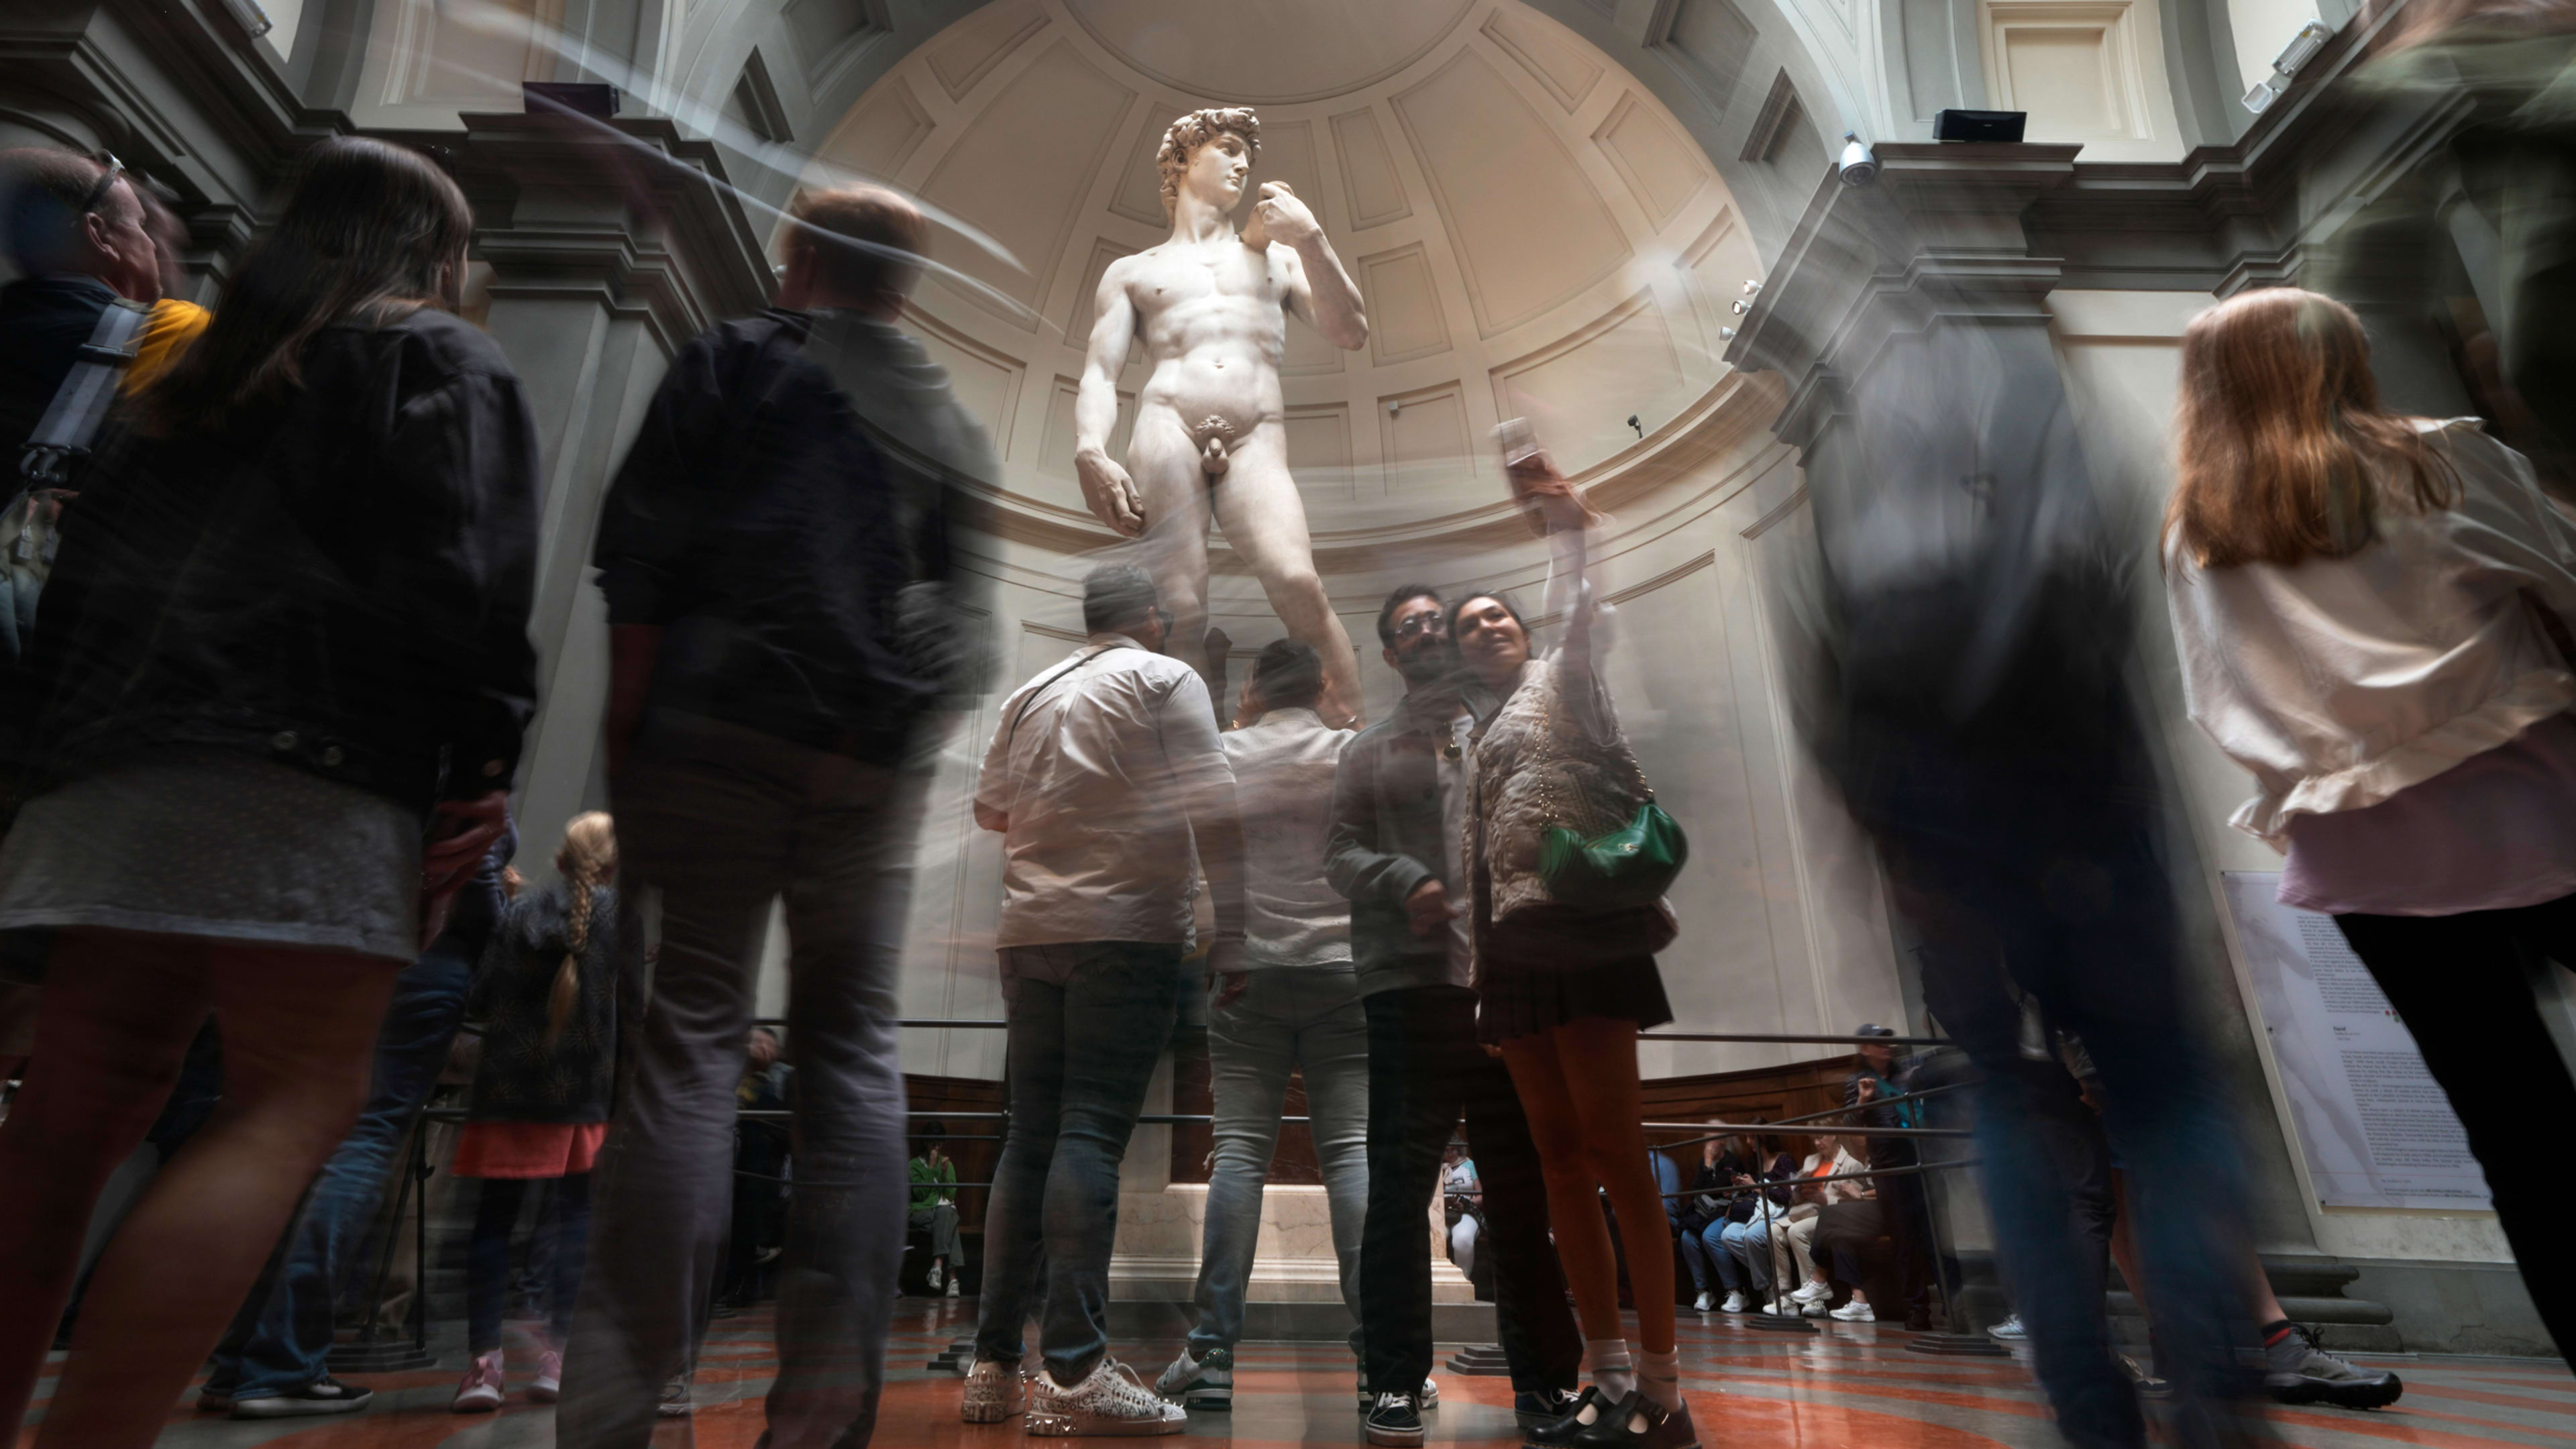 Everyone wants to see Michelangelo’s David now